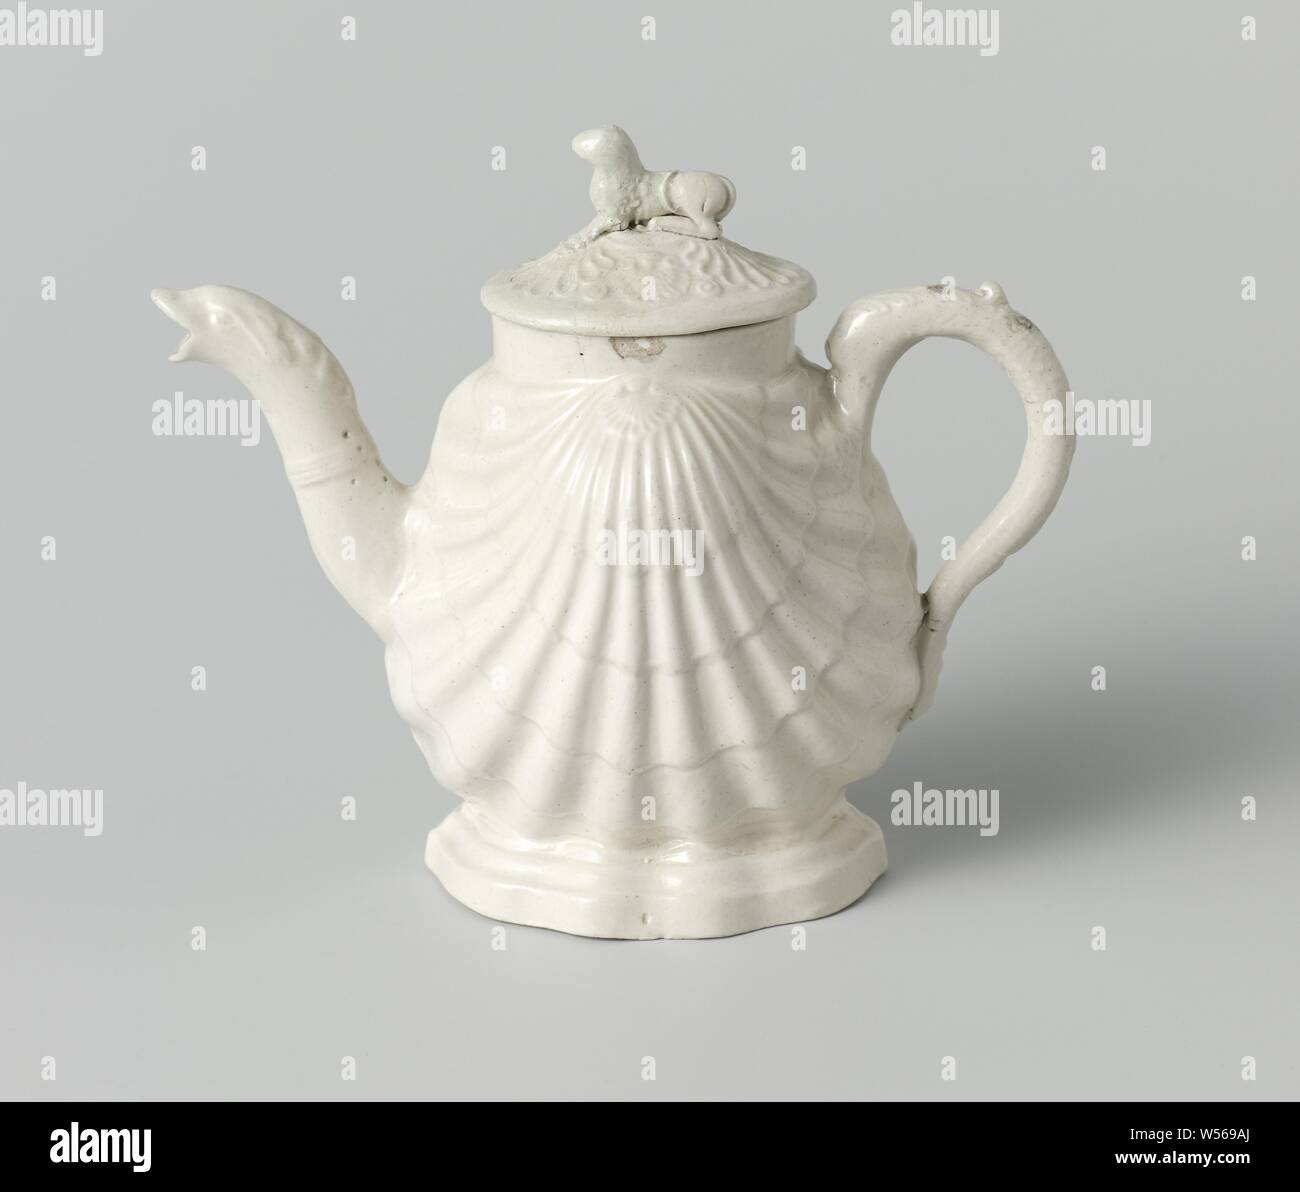 White stoneware teapot with salt glaze, Whieldon ware, White stoneware teapot with salt glaze. The belly of the pot has the shape of a double shell. The spout is bent and has the head of a fish as its mouth. The ear is C-shaped and has the shape of a dolphin. The lid has a lying dog or lion as a button., anonymous, England, c. 1750 - c. 1760, stoneware, salt glaze, h 13.5 cm Stock Photo